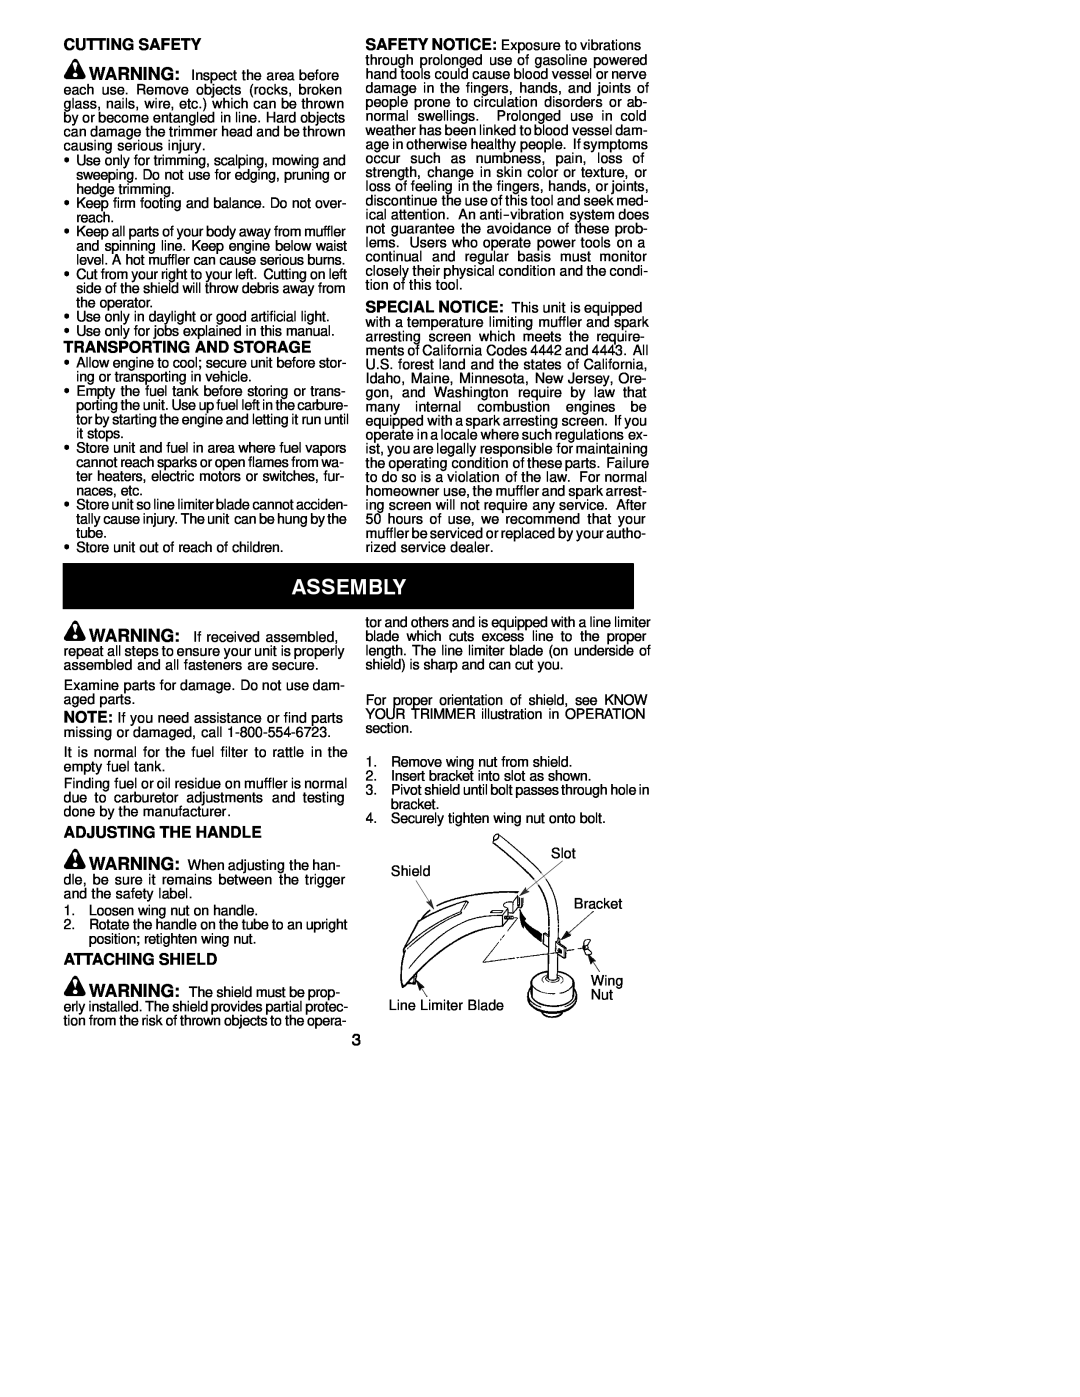 Weed Eater 530163444 instruction manual Cutting Safety, Transporting And Storage, Adjusting The Handle, Attaching Shield 